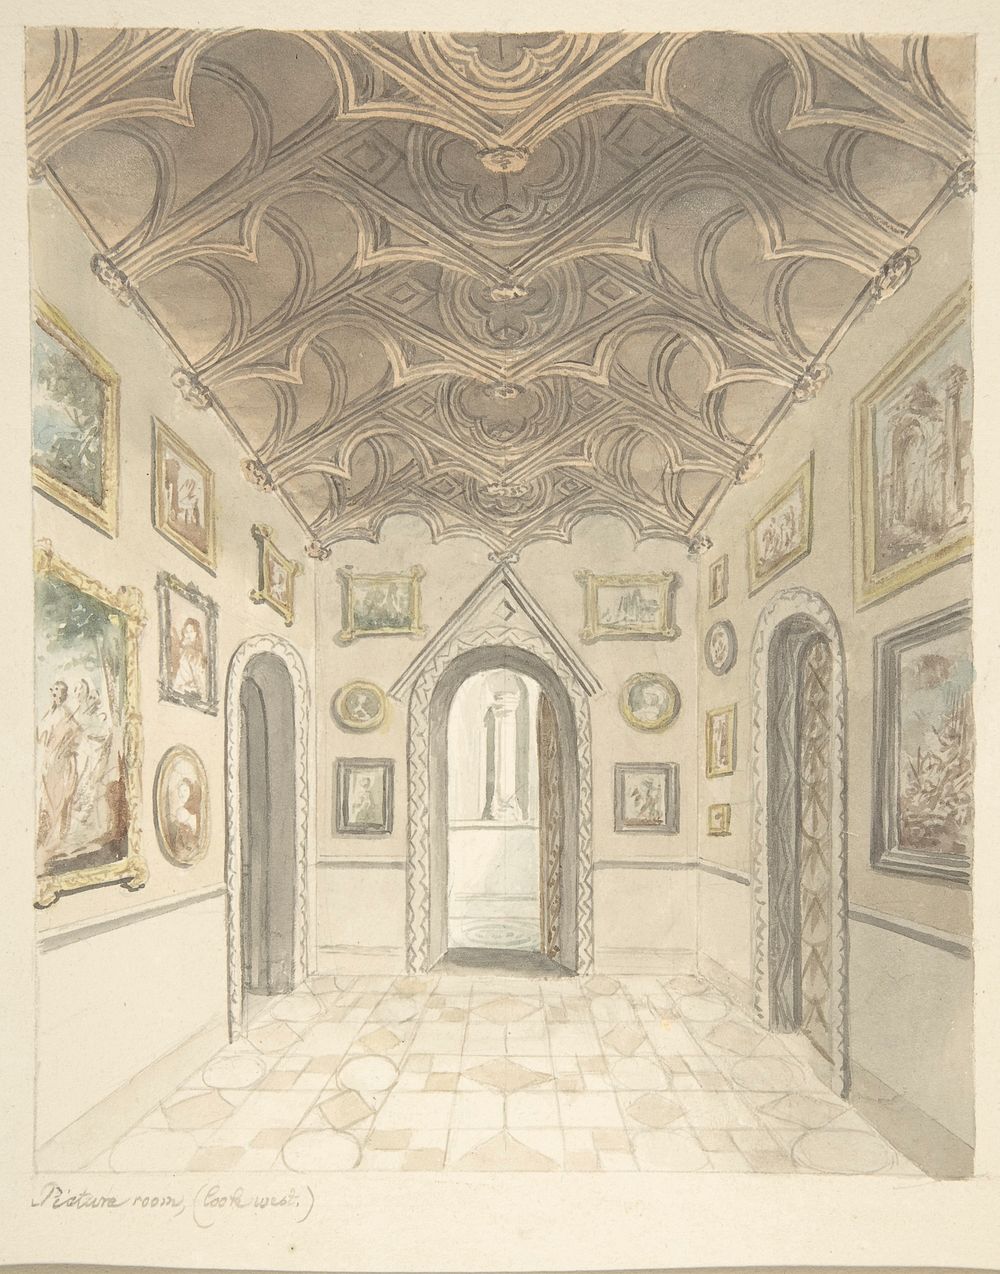 Lea Castle, Worcestershire, Picture Room, Looking West, attributed to John Carter